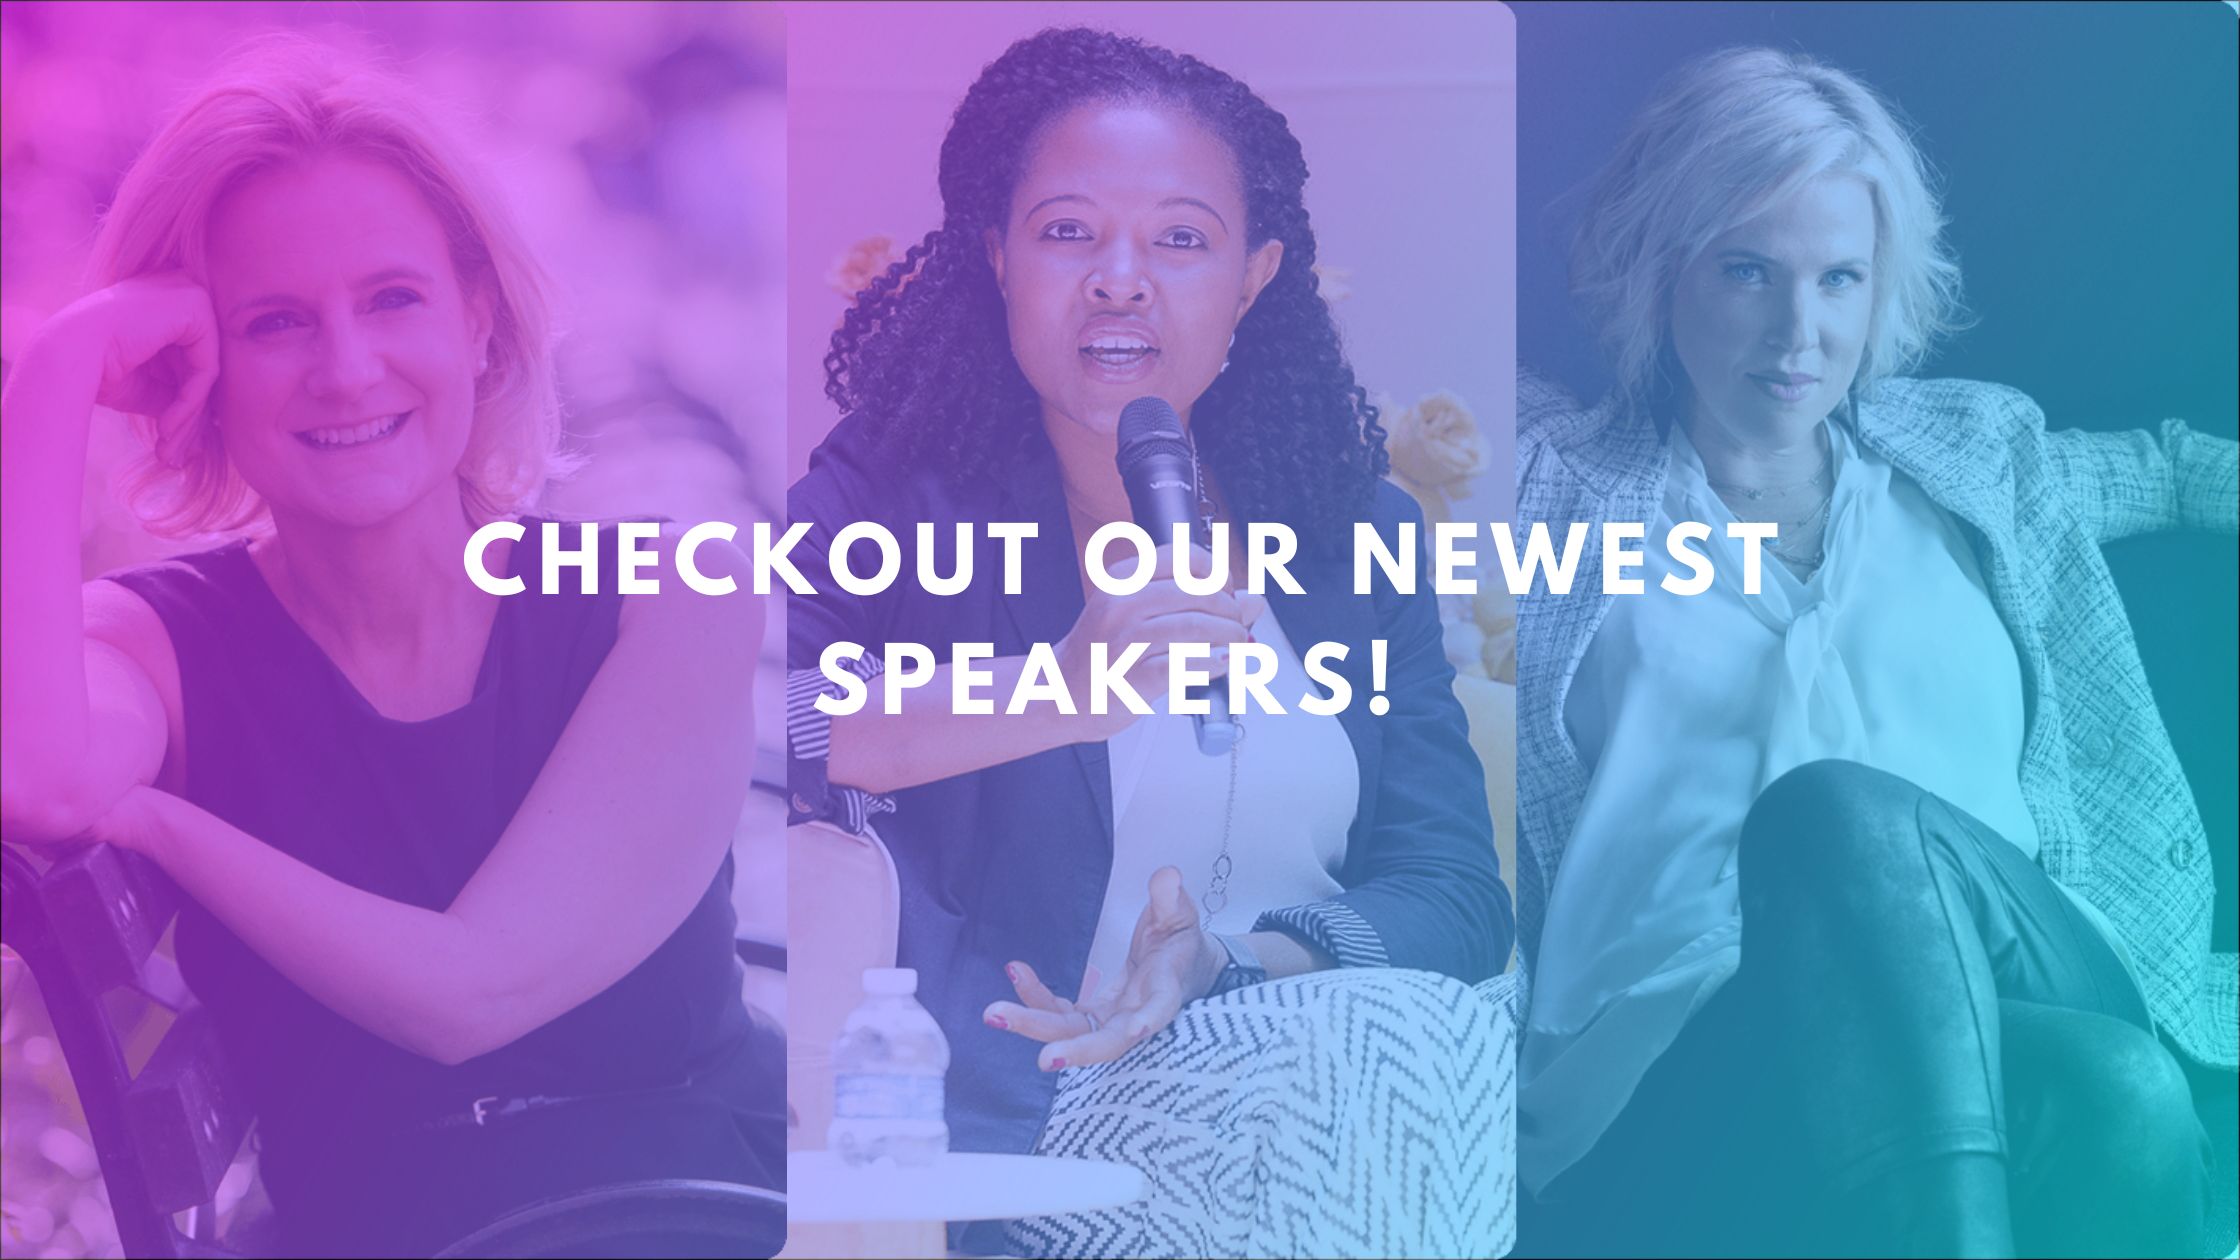 Checkout our newest speakers!